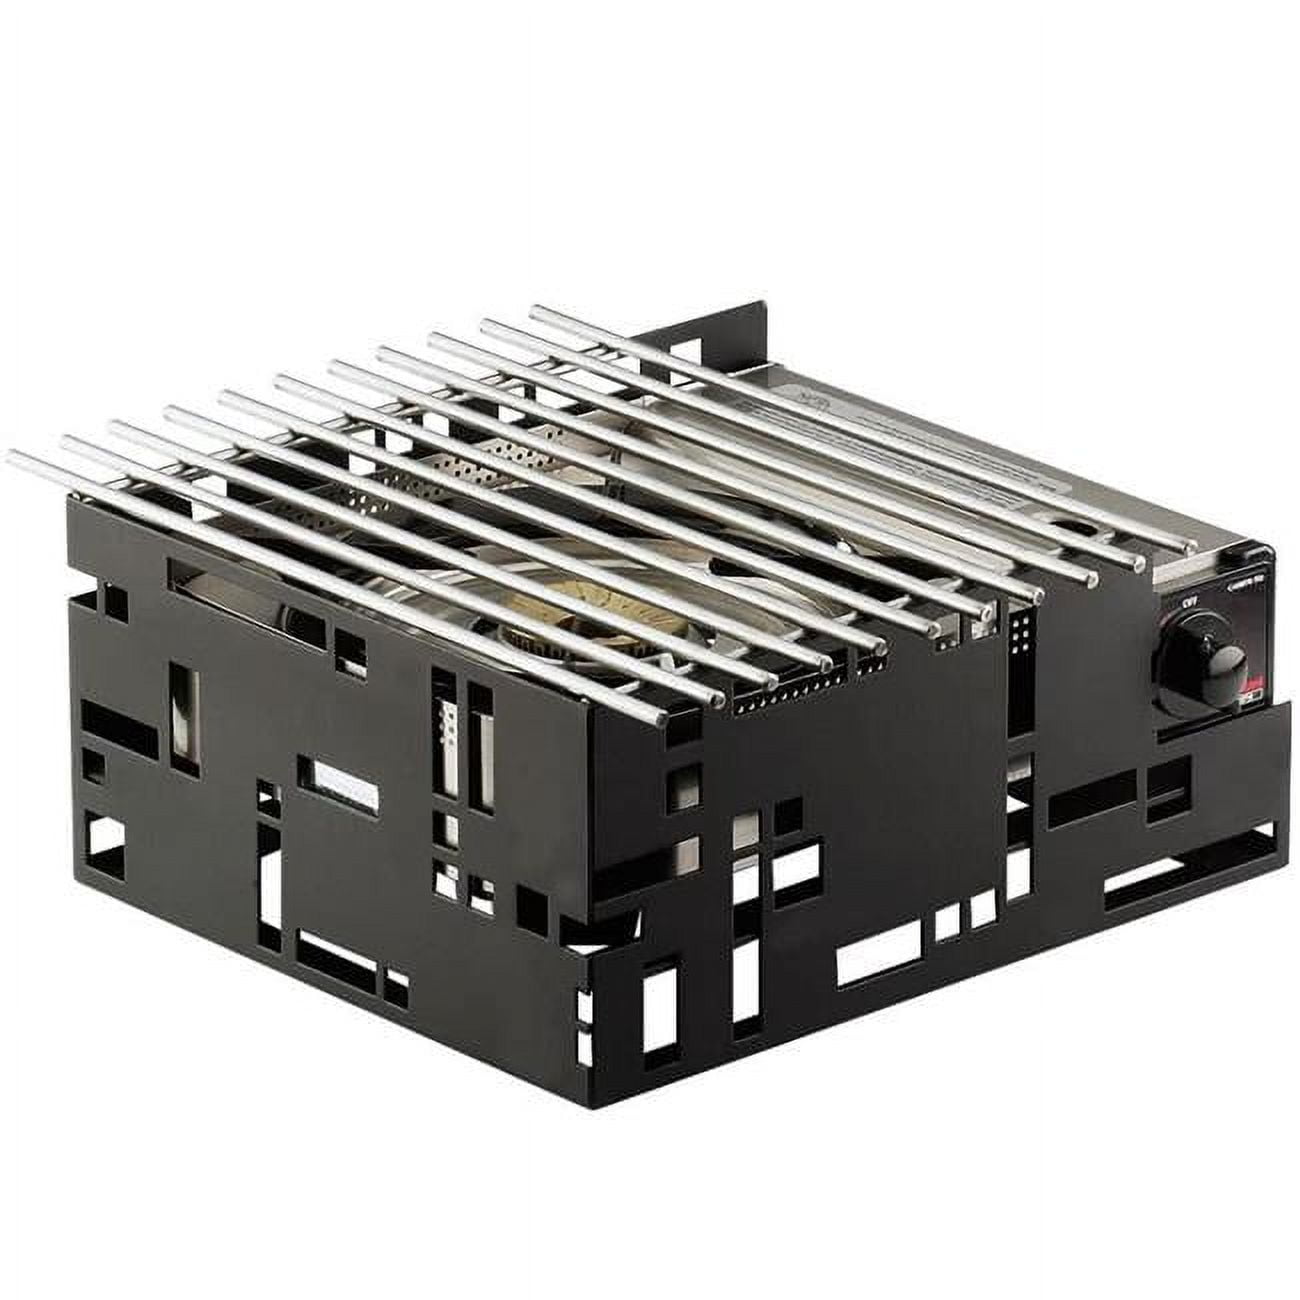 Picture of Cal Mil 1617-13 Black Steel Squared Butane Stove Frame - 13 x 11 x 6 in.